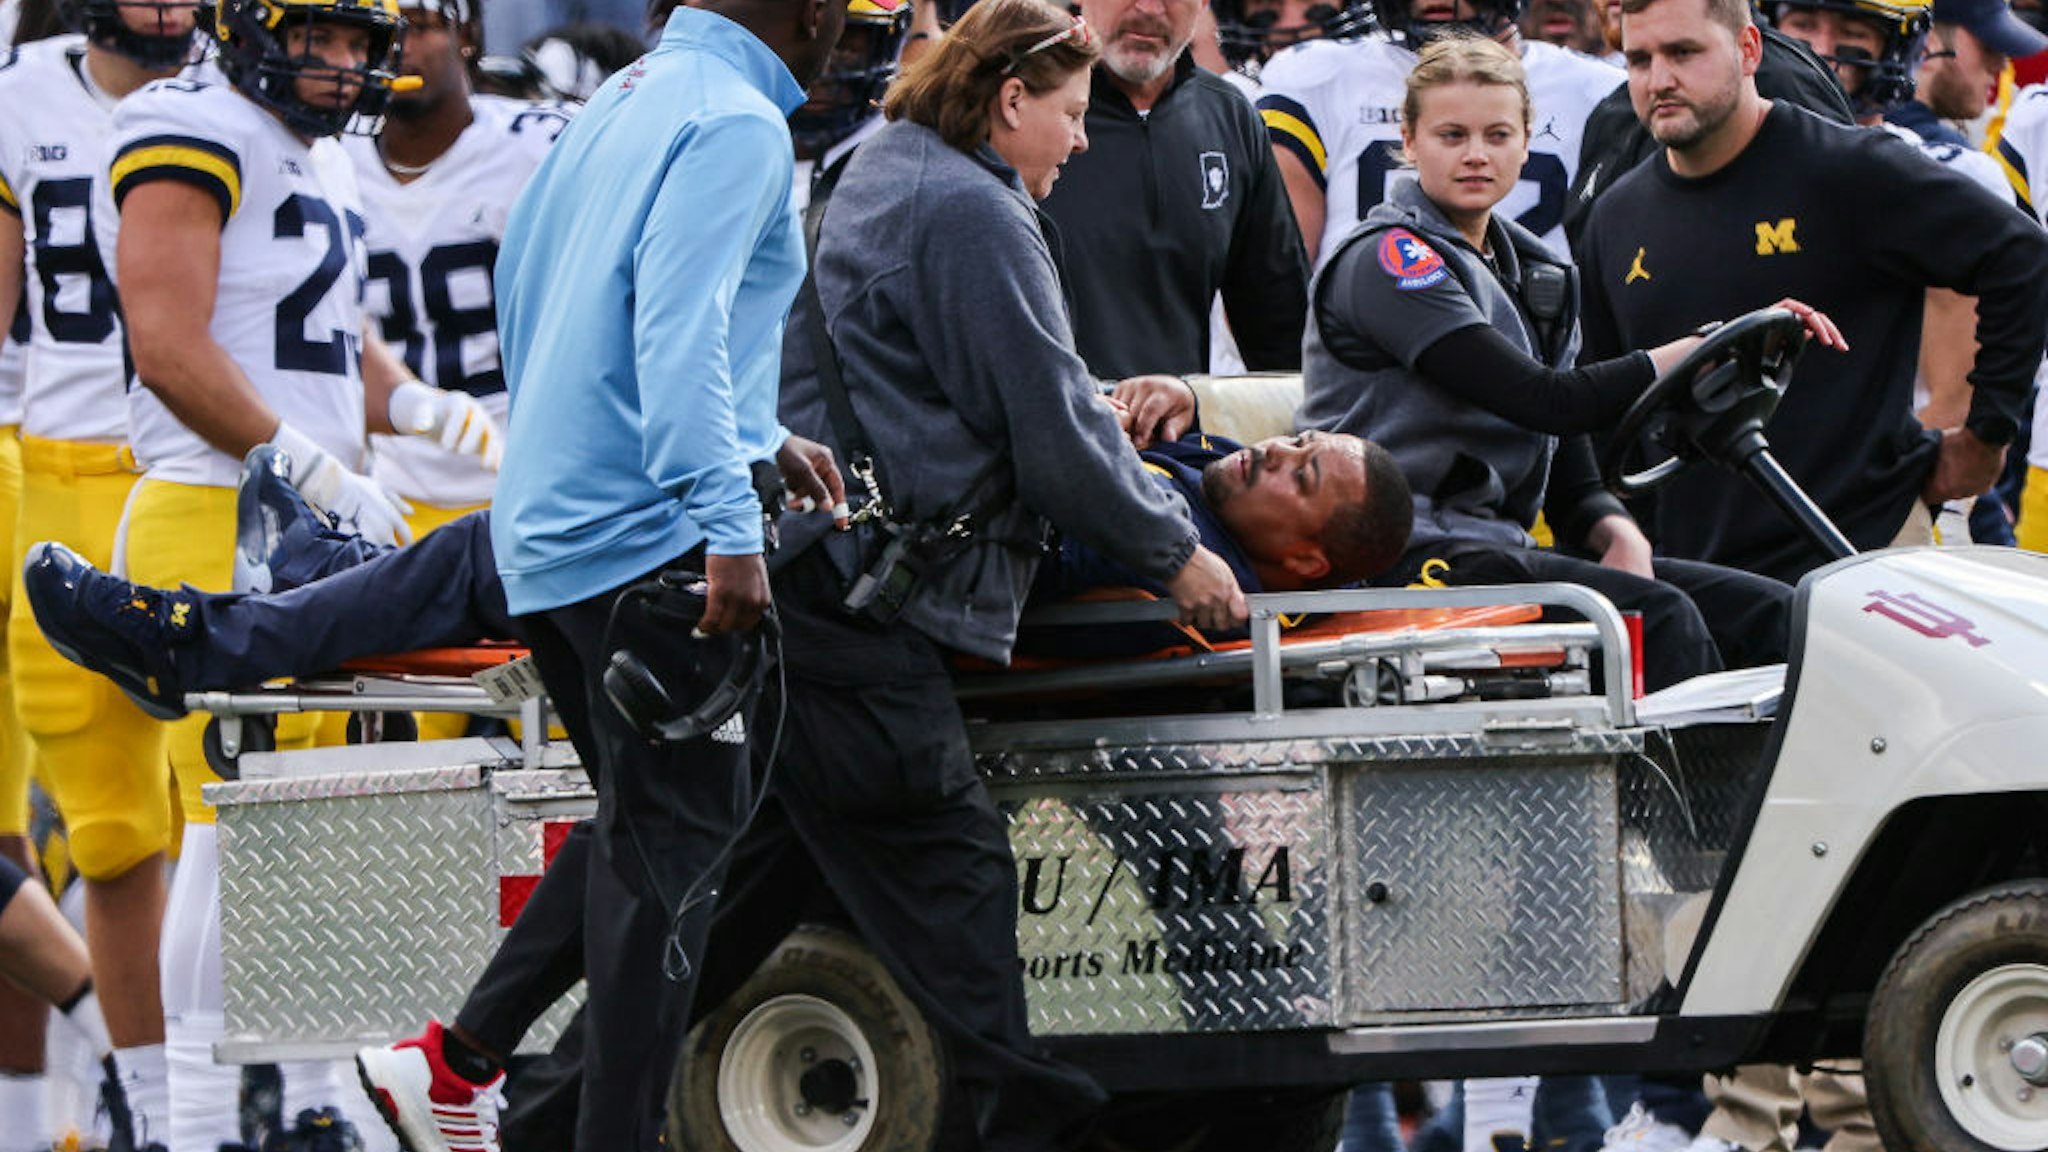 BLOOMINGTON, IN - OCTOBER 08: Michigan Wolverines running back coach Mike Hart is carted off of the field during the first half against the Indiana Hoosiers at Memorial Stadium on October 8, 2022 in Bloomington, Indiana.